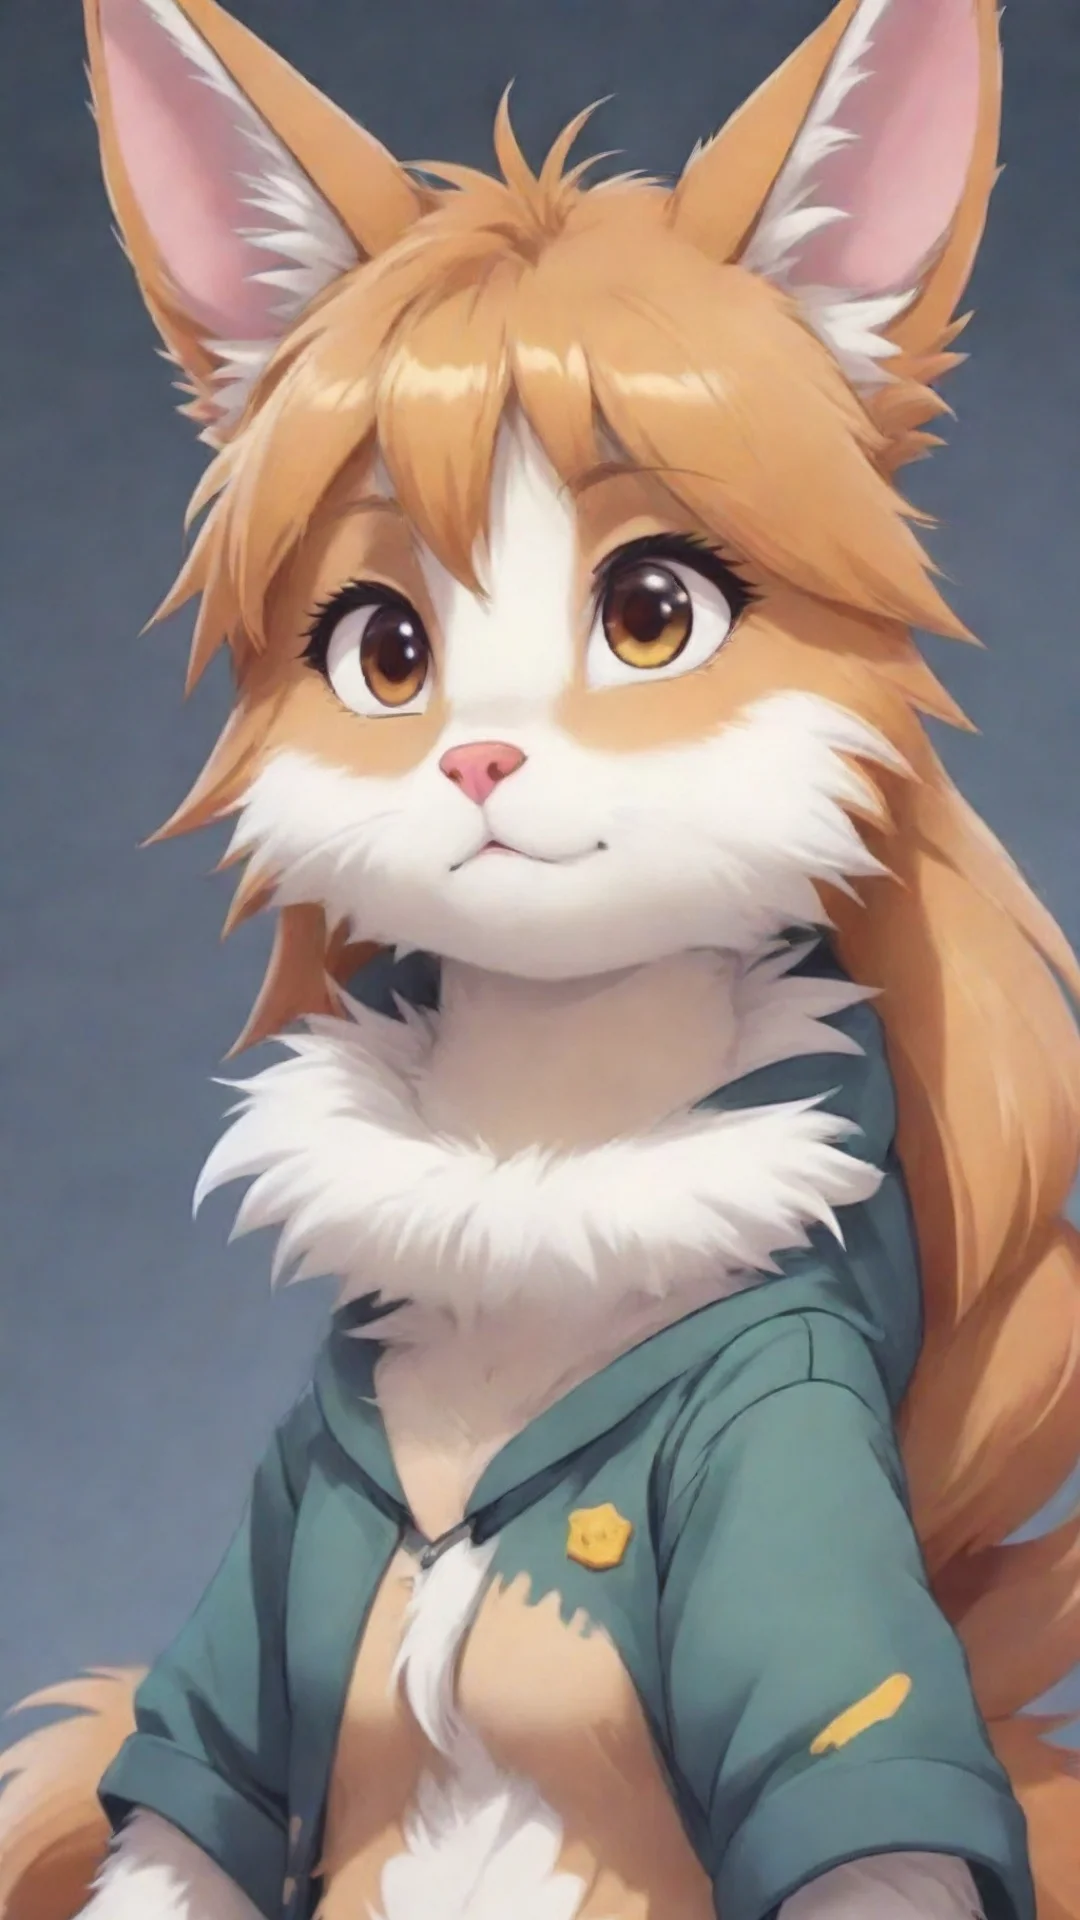 aiartstation art furry cute in anime style confident engaging wow 3 tall